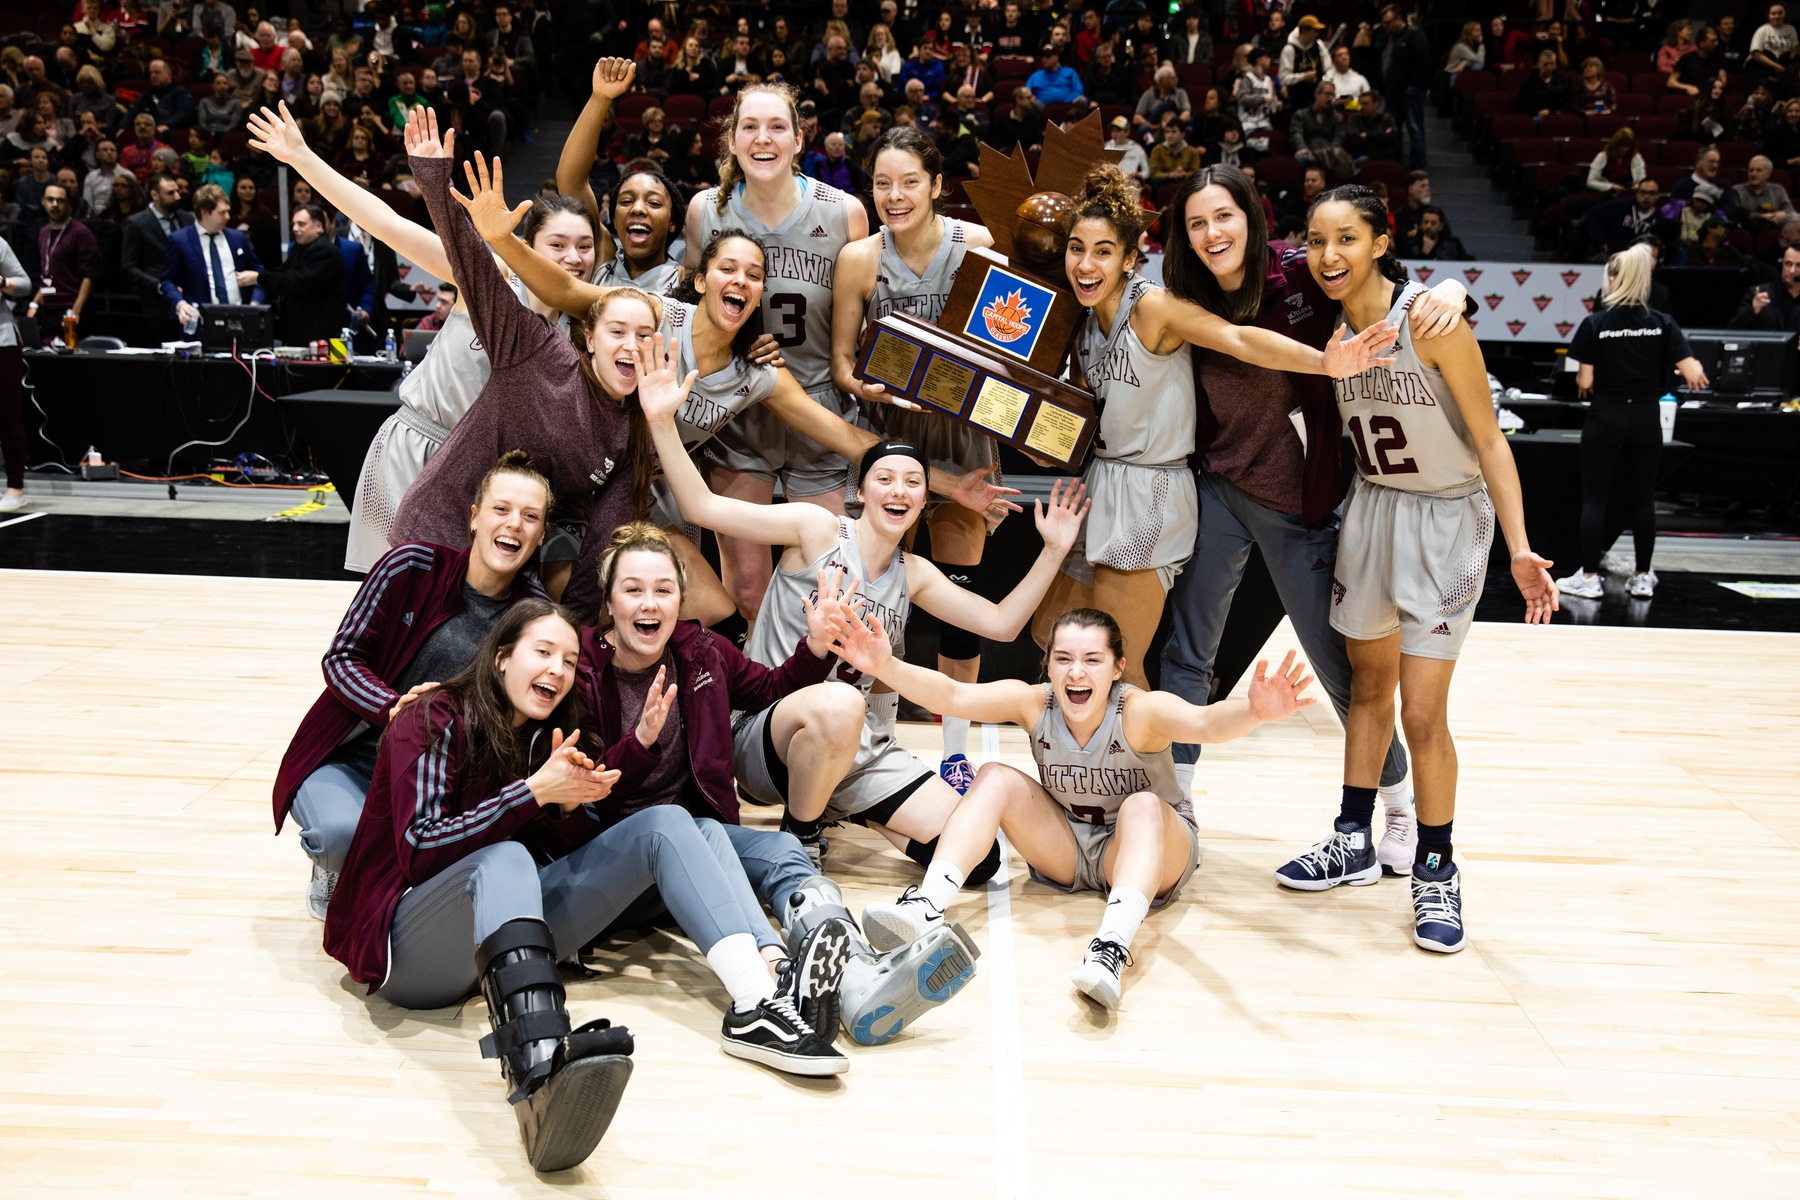 Gee-Gees women's team 2020 celebrates with trophy